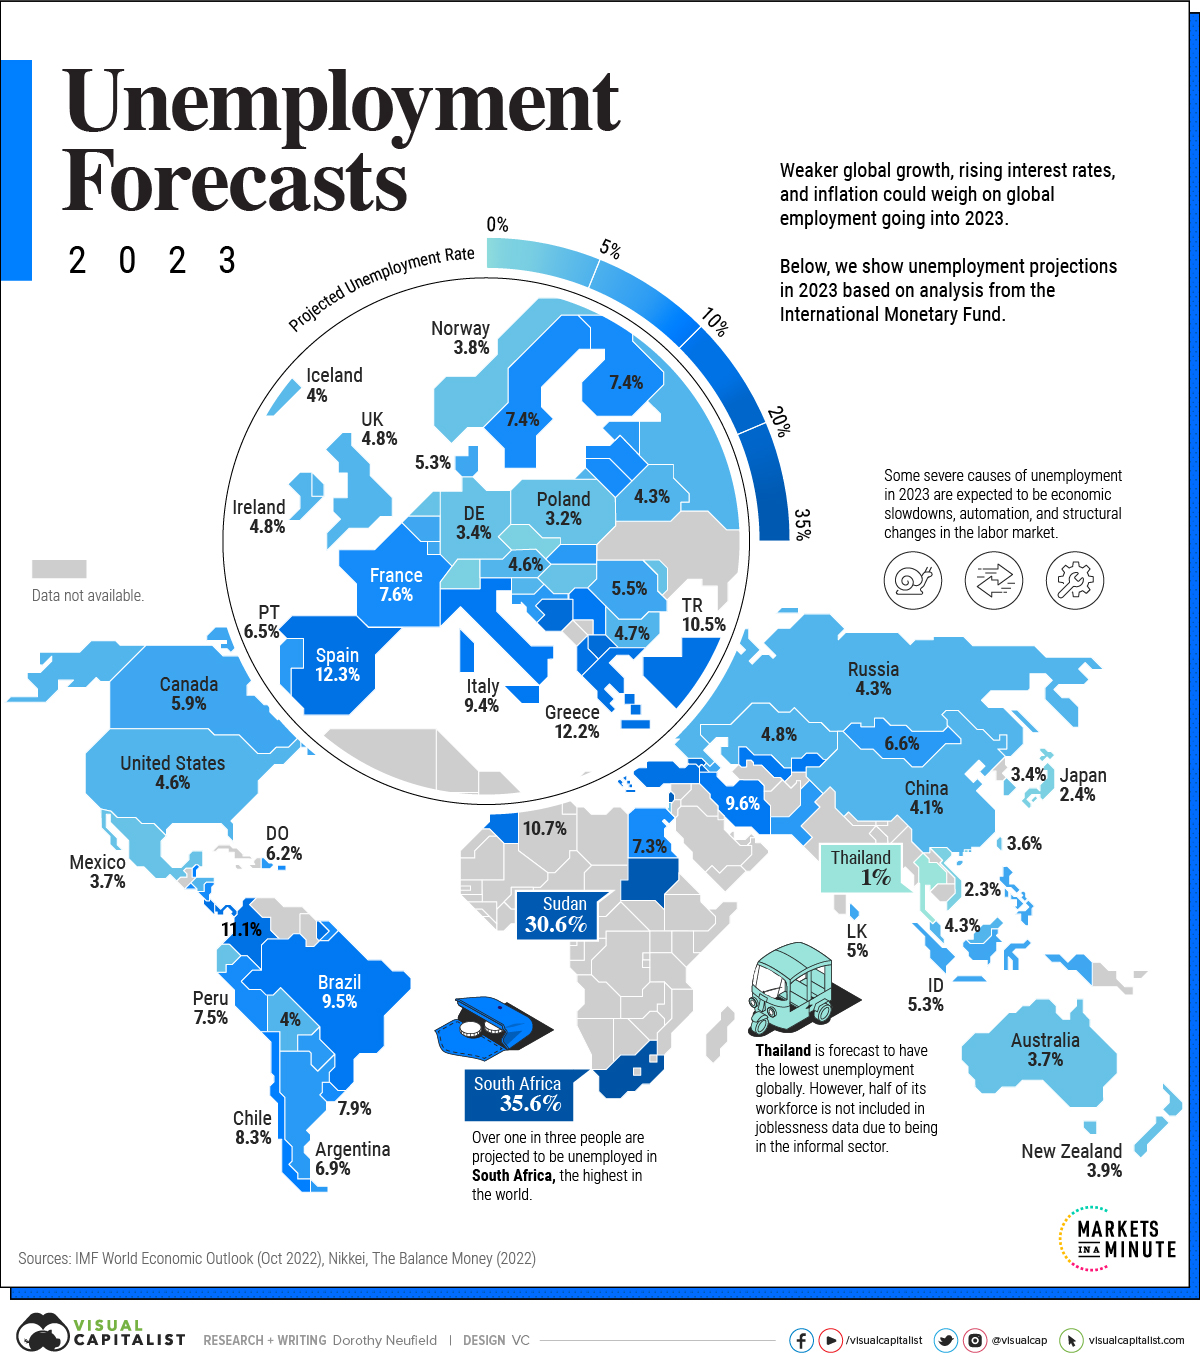 Unemployment Forecasts for 2023